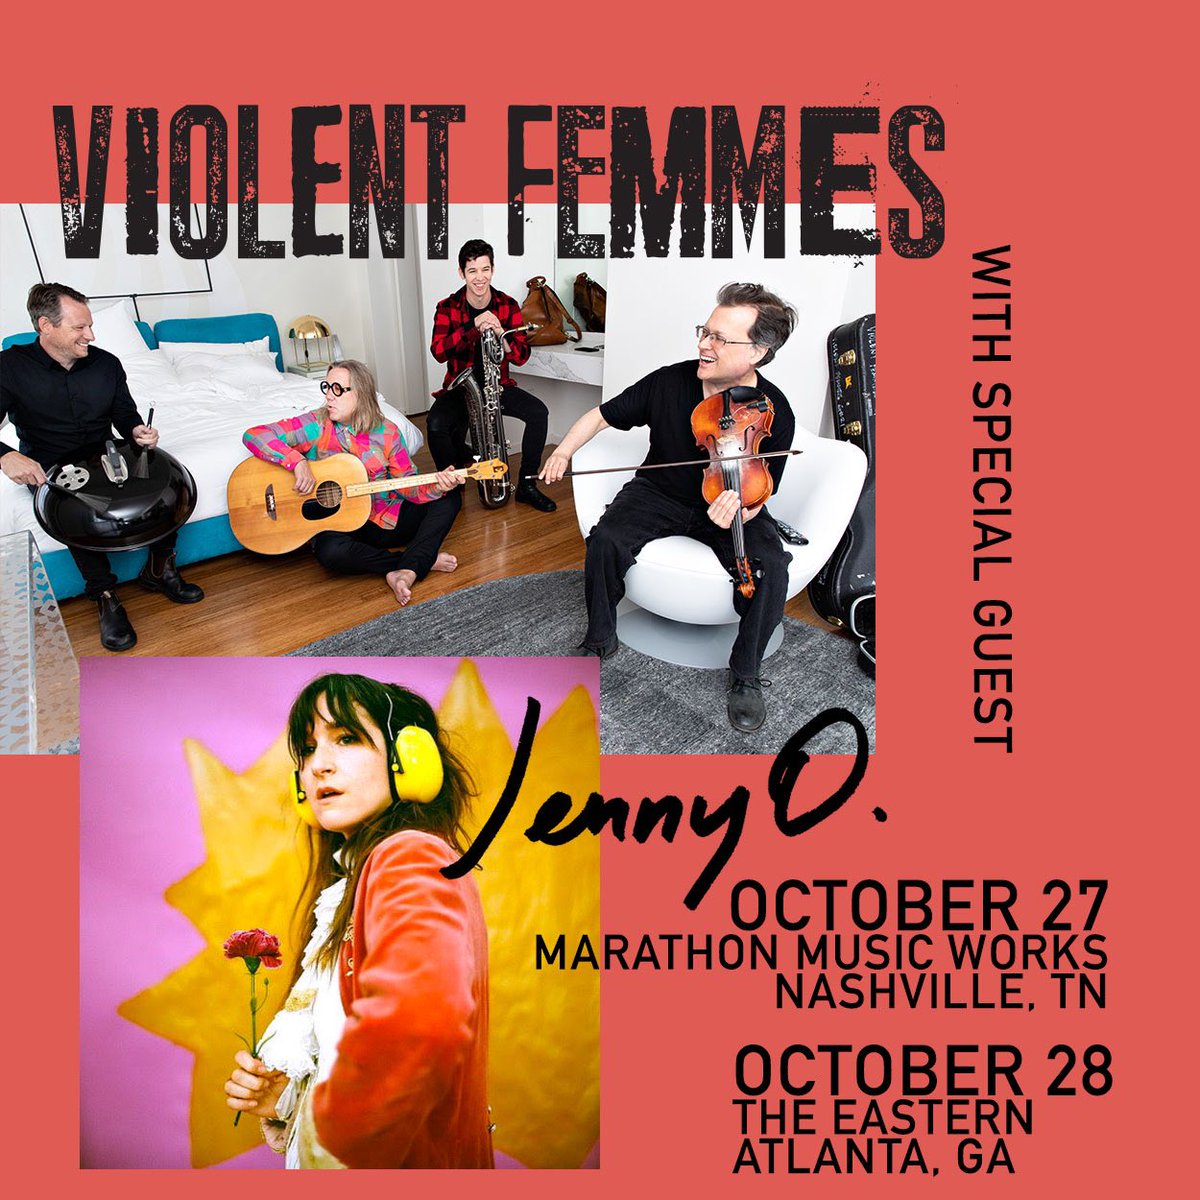 We’re happy to announce that @jjjennyo will be opening at our shows in Nashville and Atlanta! Vfemmes.com/tour